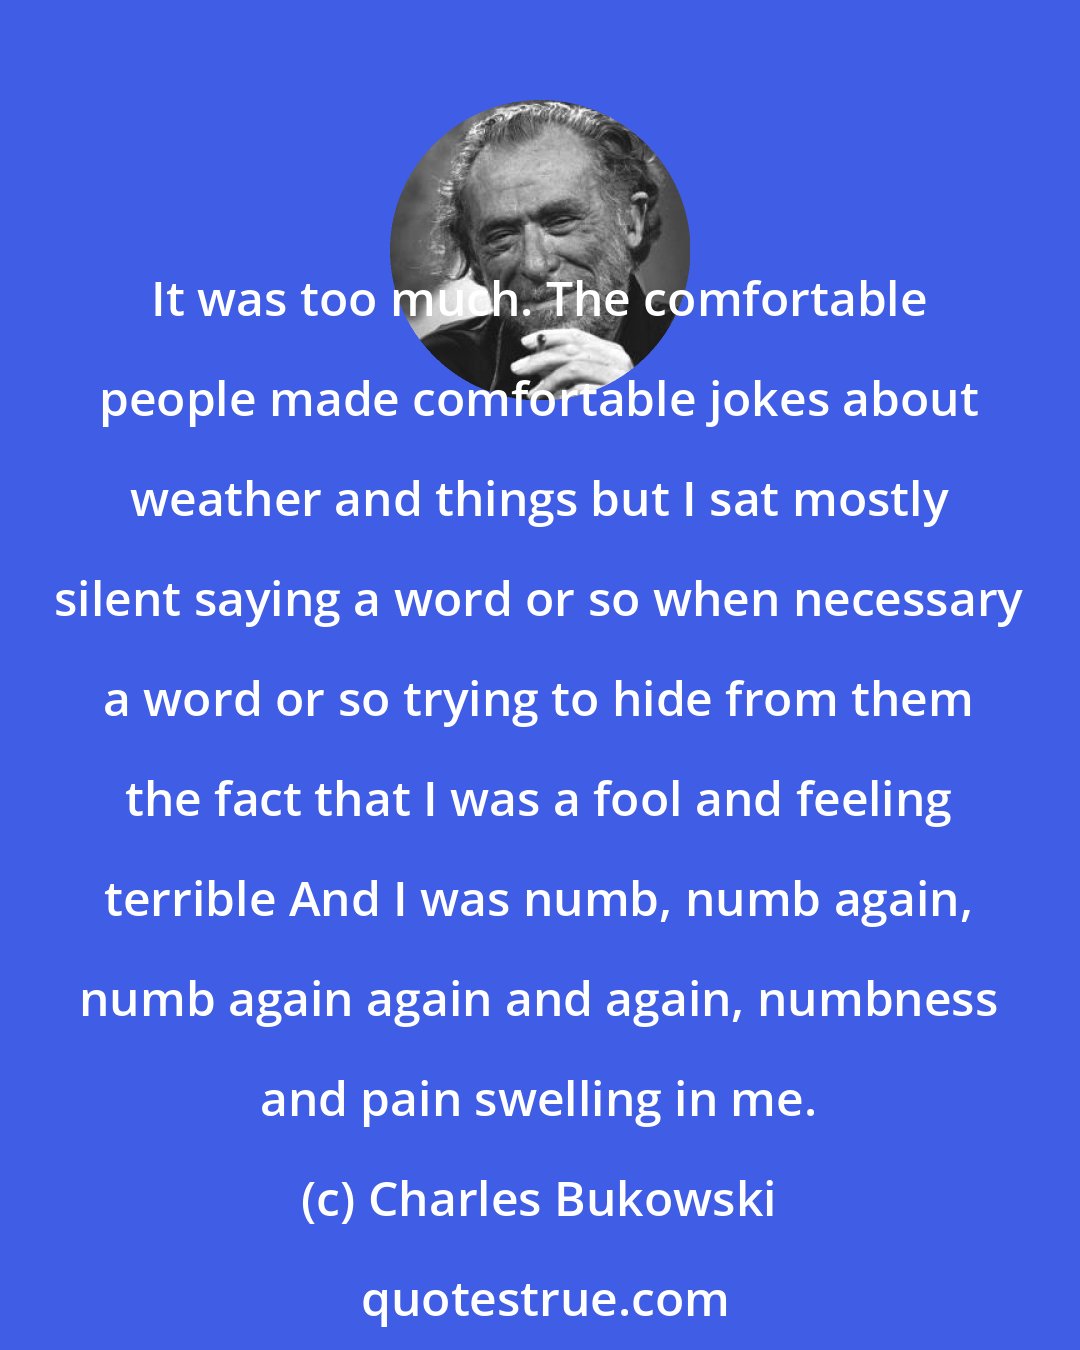 Charles Bukowski: It was too much. The comfortable people made comfortable jokes about weather and things but I sat mostly silent saying a word or so when necessary a word or so trying to hide from them the fact that I was a fool and feeling terrible And I was numb, numb again, numb again again and again, numbness and pain swelling in me.